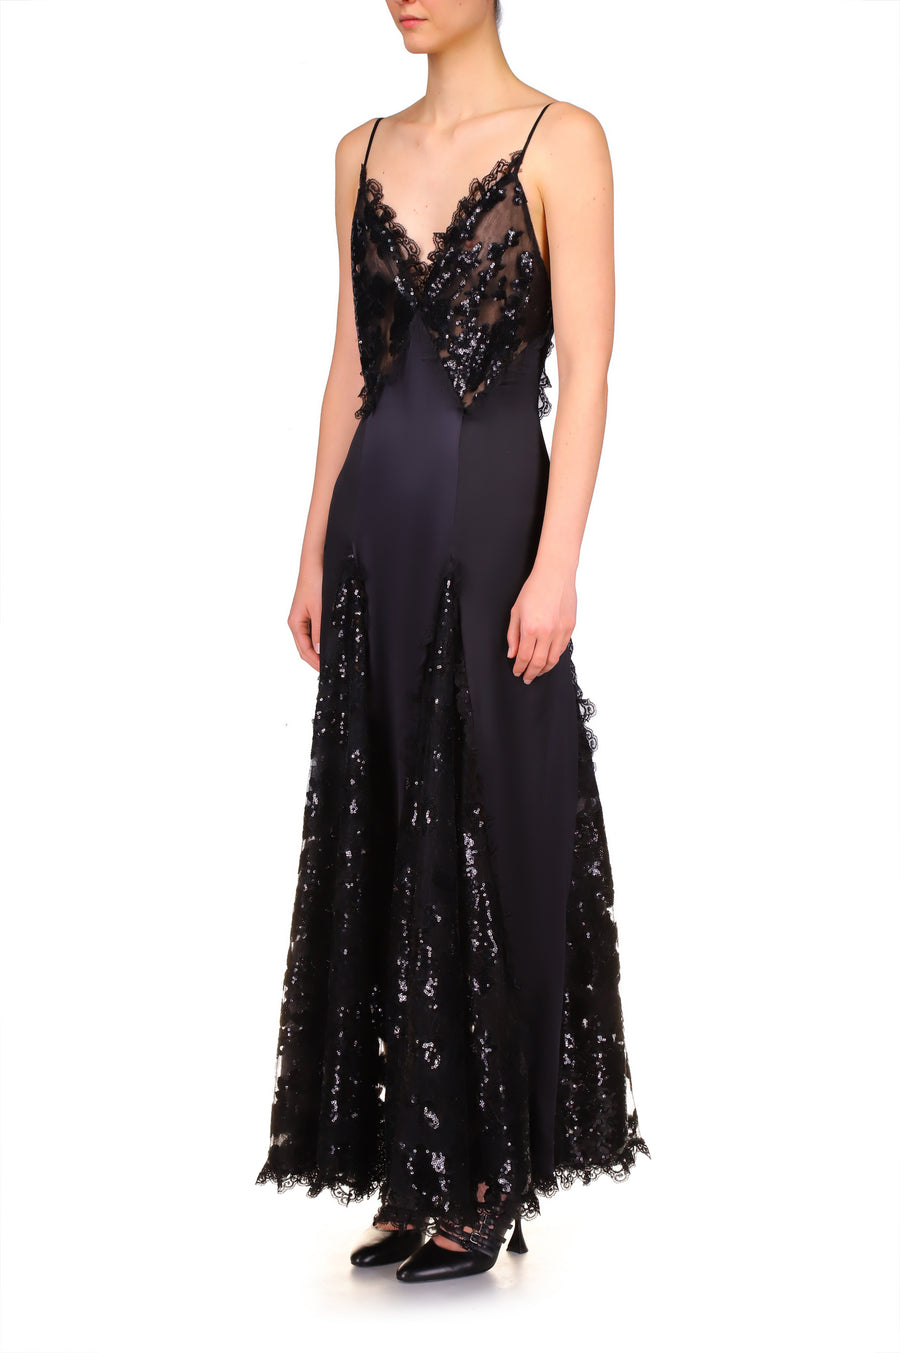 Black Silk Satin And Black Sequin Dress With Godet And Lace Ruffle